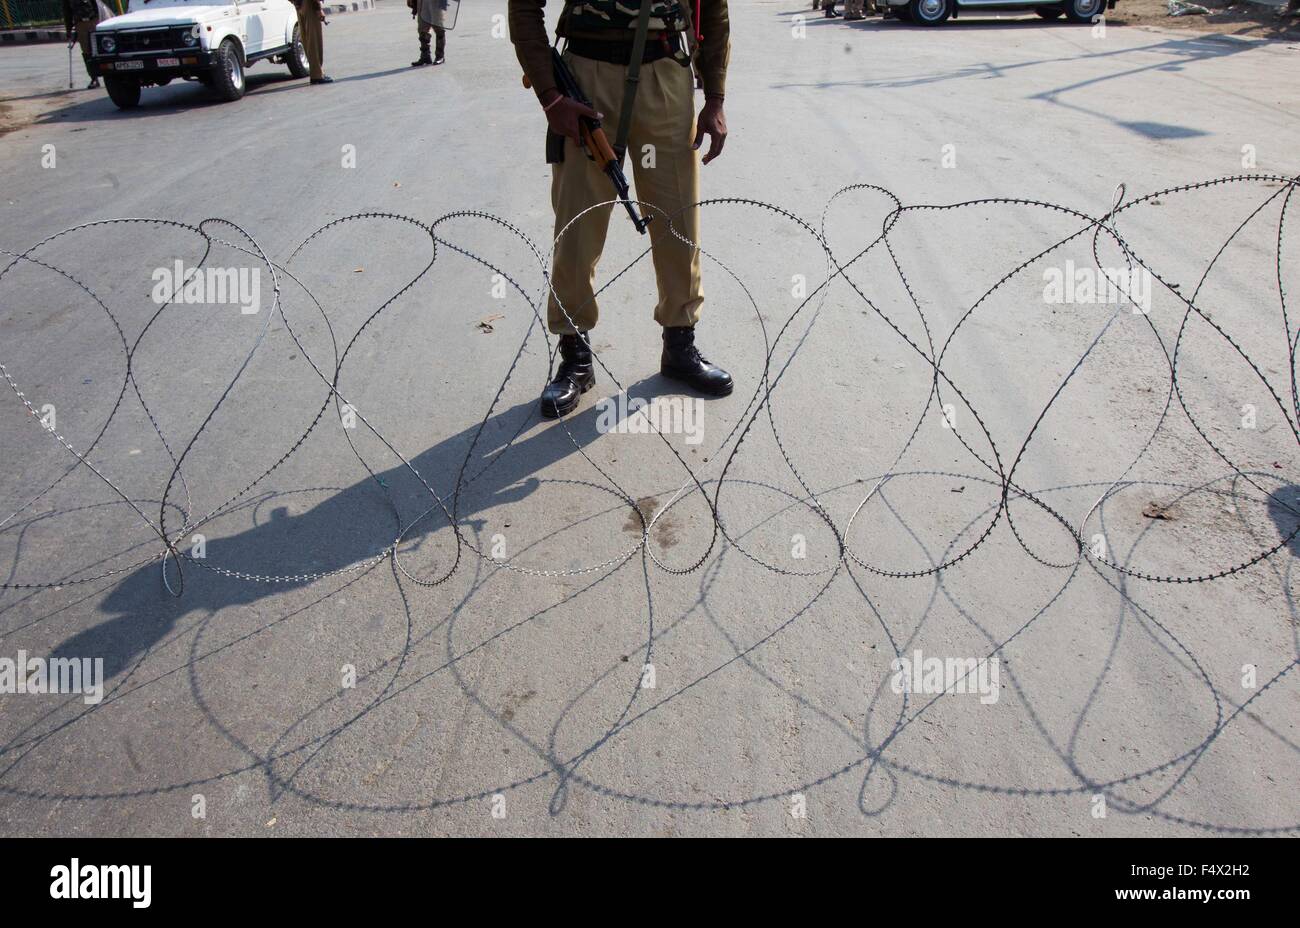 Srinagar, Indian-controlled Kashmir. 23rd Oct, 2015. An Indian paramilitary soldier stands guard near a barbed wire barricade during restrictions in old city of Srinagar, summer capital of Indian-controlled Kashmir, Oct. 23, 2015. The authorities on Friday imposed strict restrictions in several areas of restive Indian controlled Kashmir to disallow protest programme of separatist leaders and prevent clashes over killing of a trucker. Credit:  Javed Dar/Xinhua/Alamy Live News Stock Photo